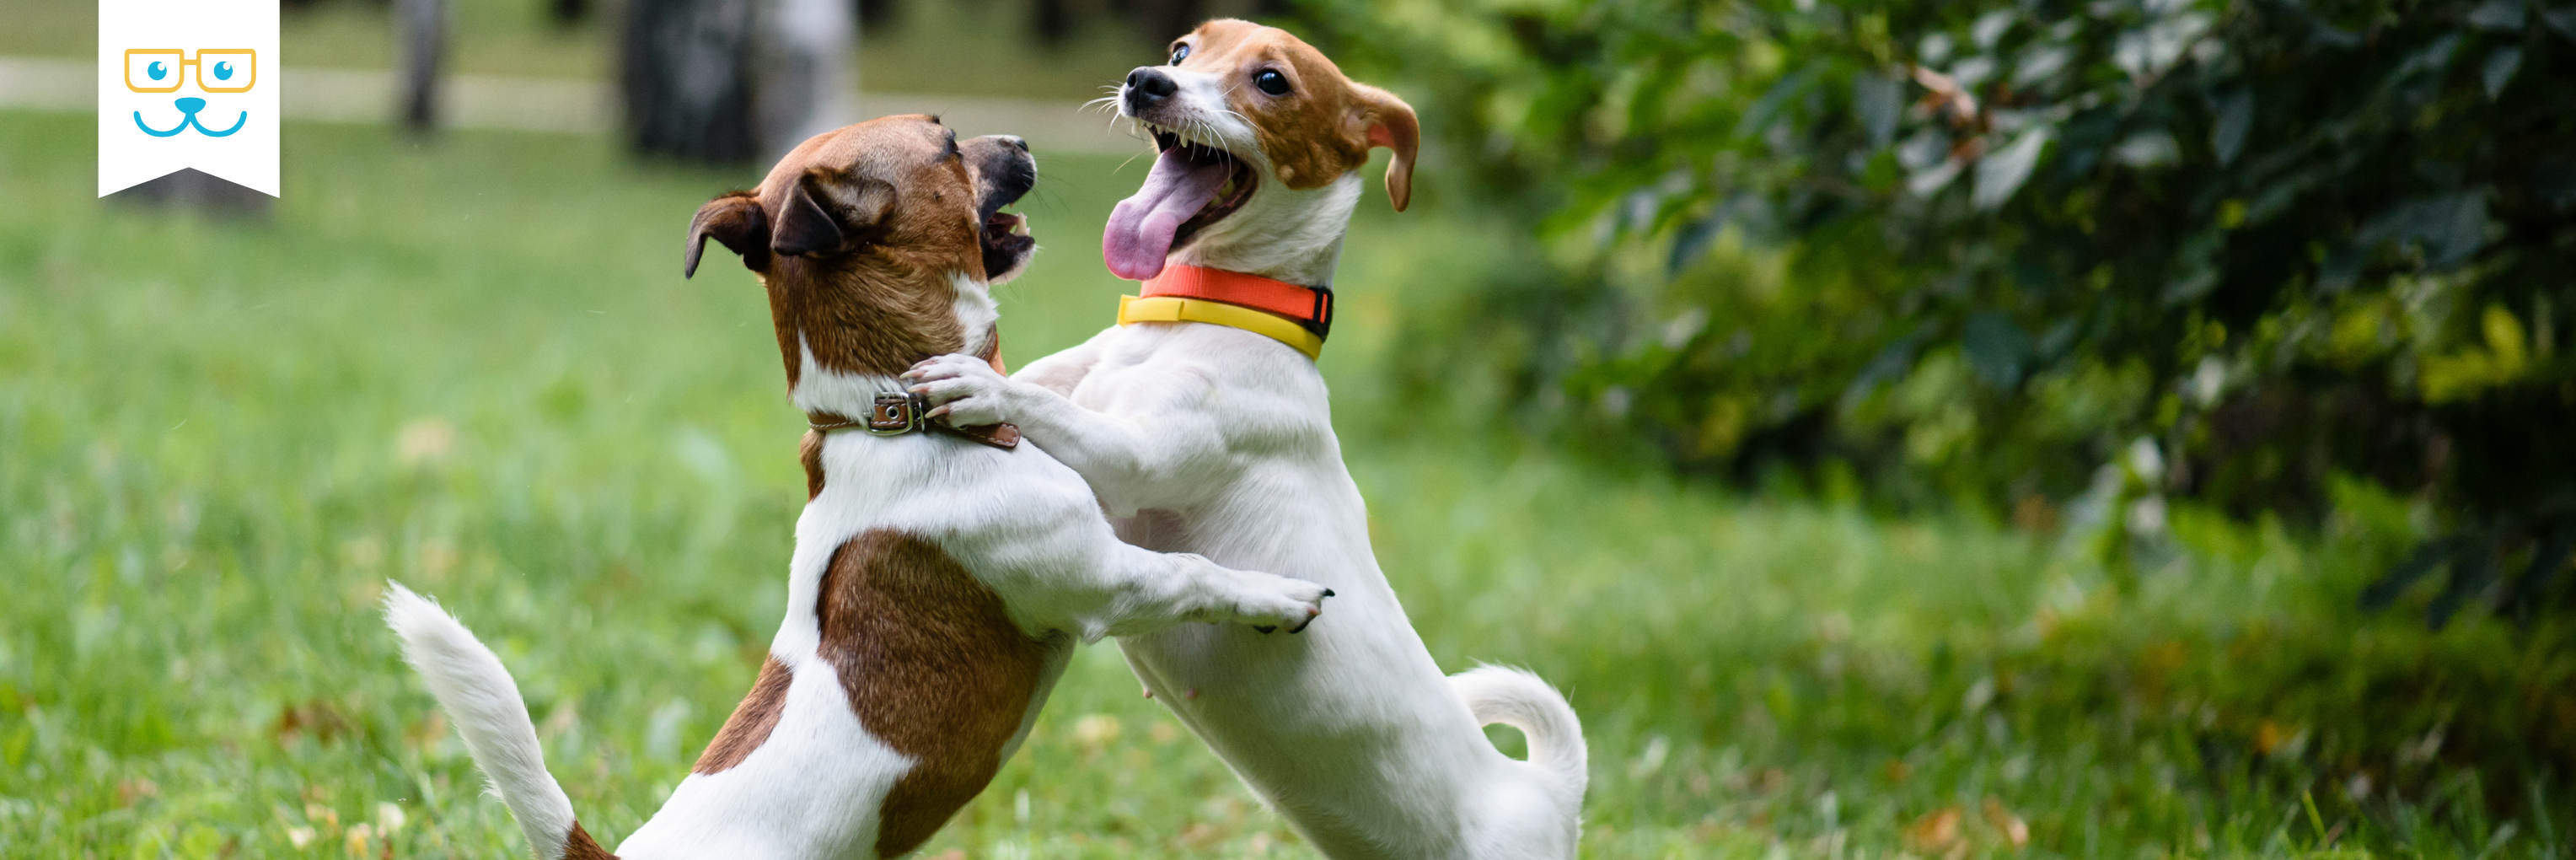 how do you know if your dog has behavior problems